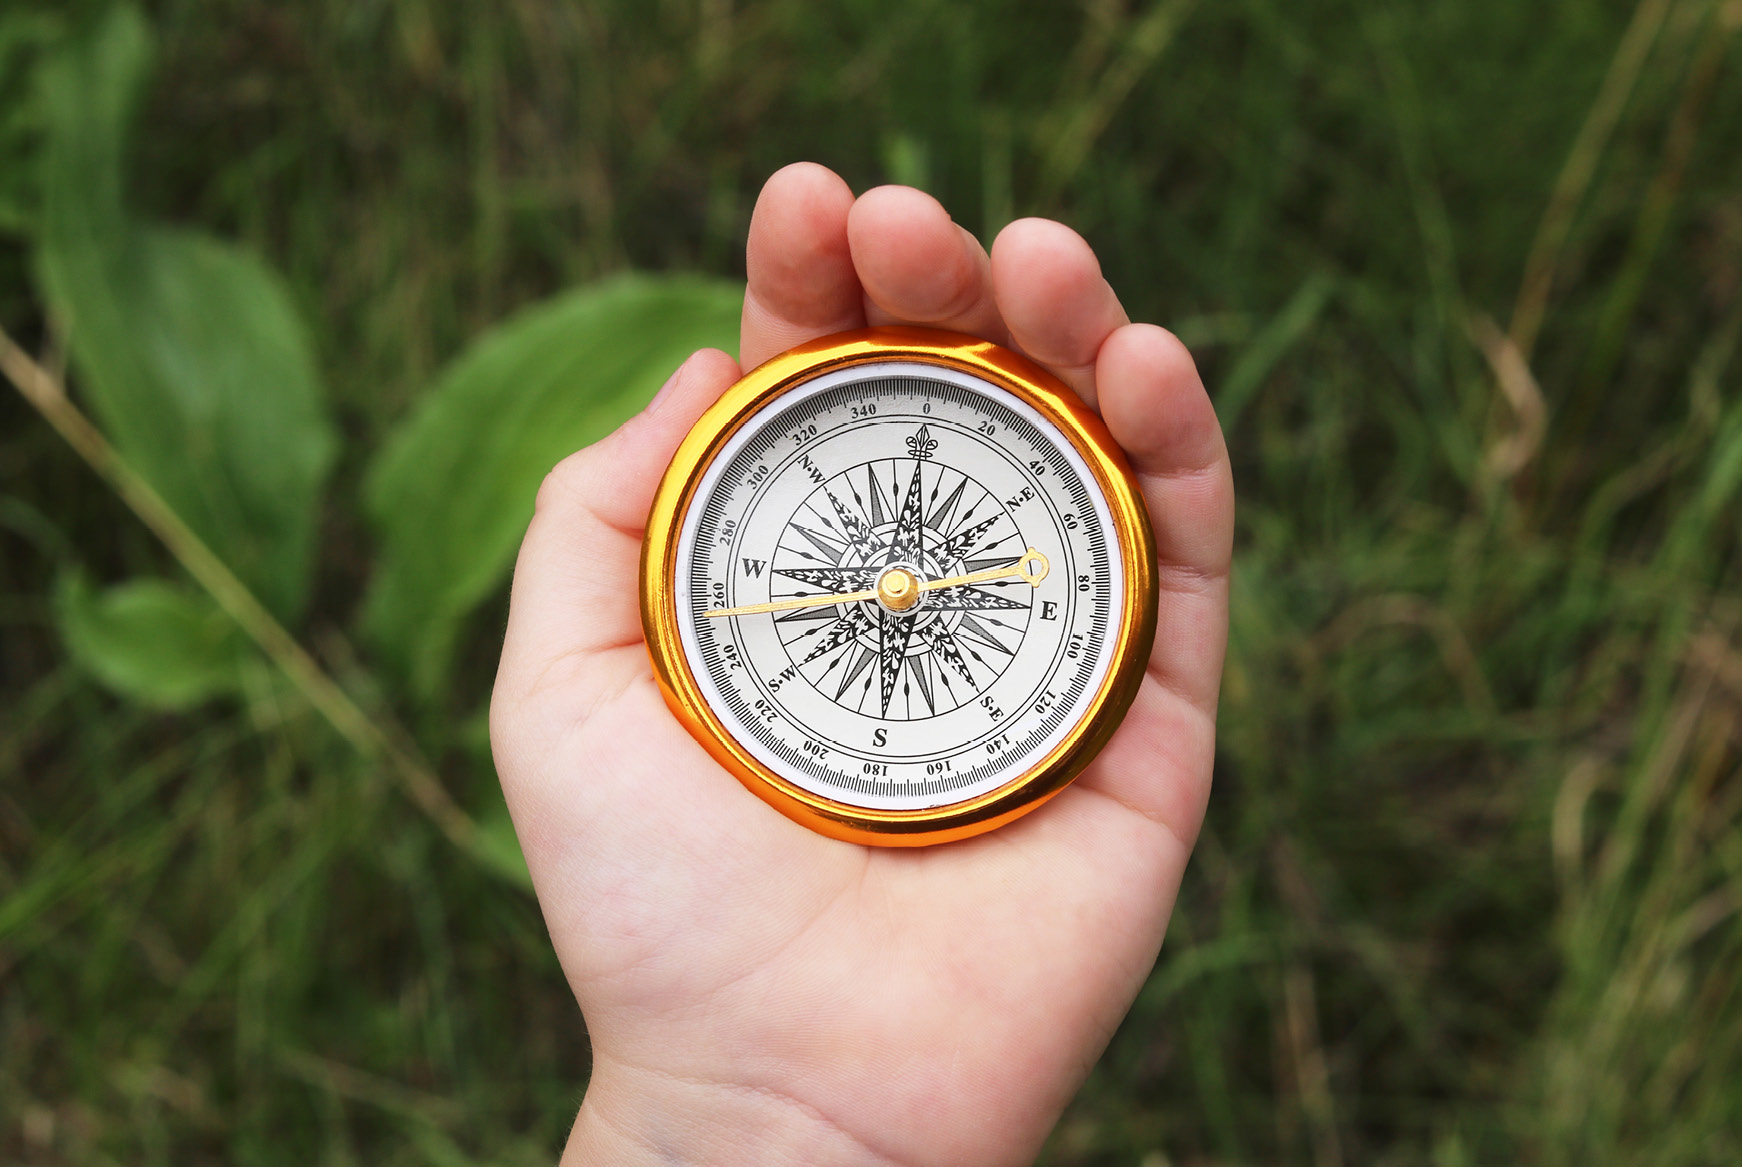 Compass held in a palm